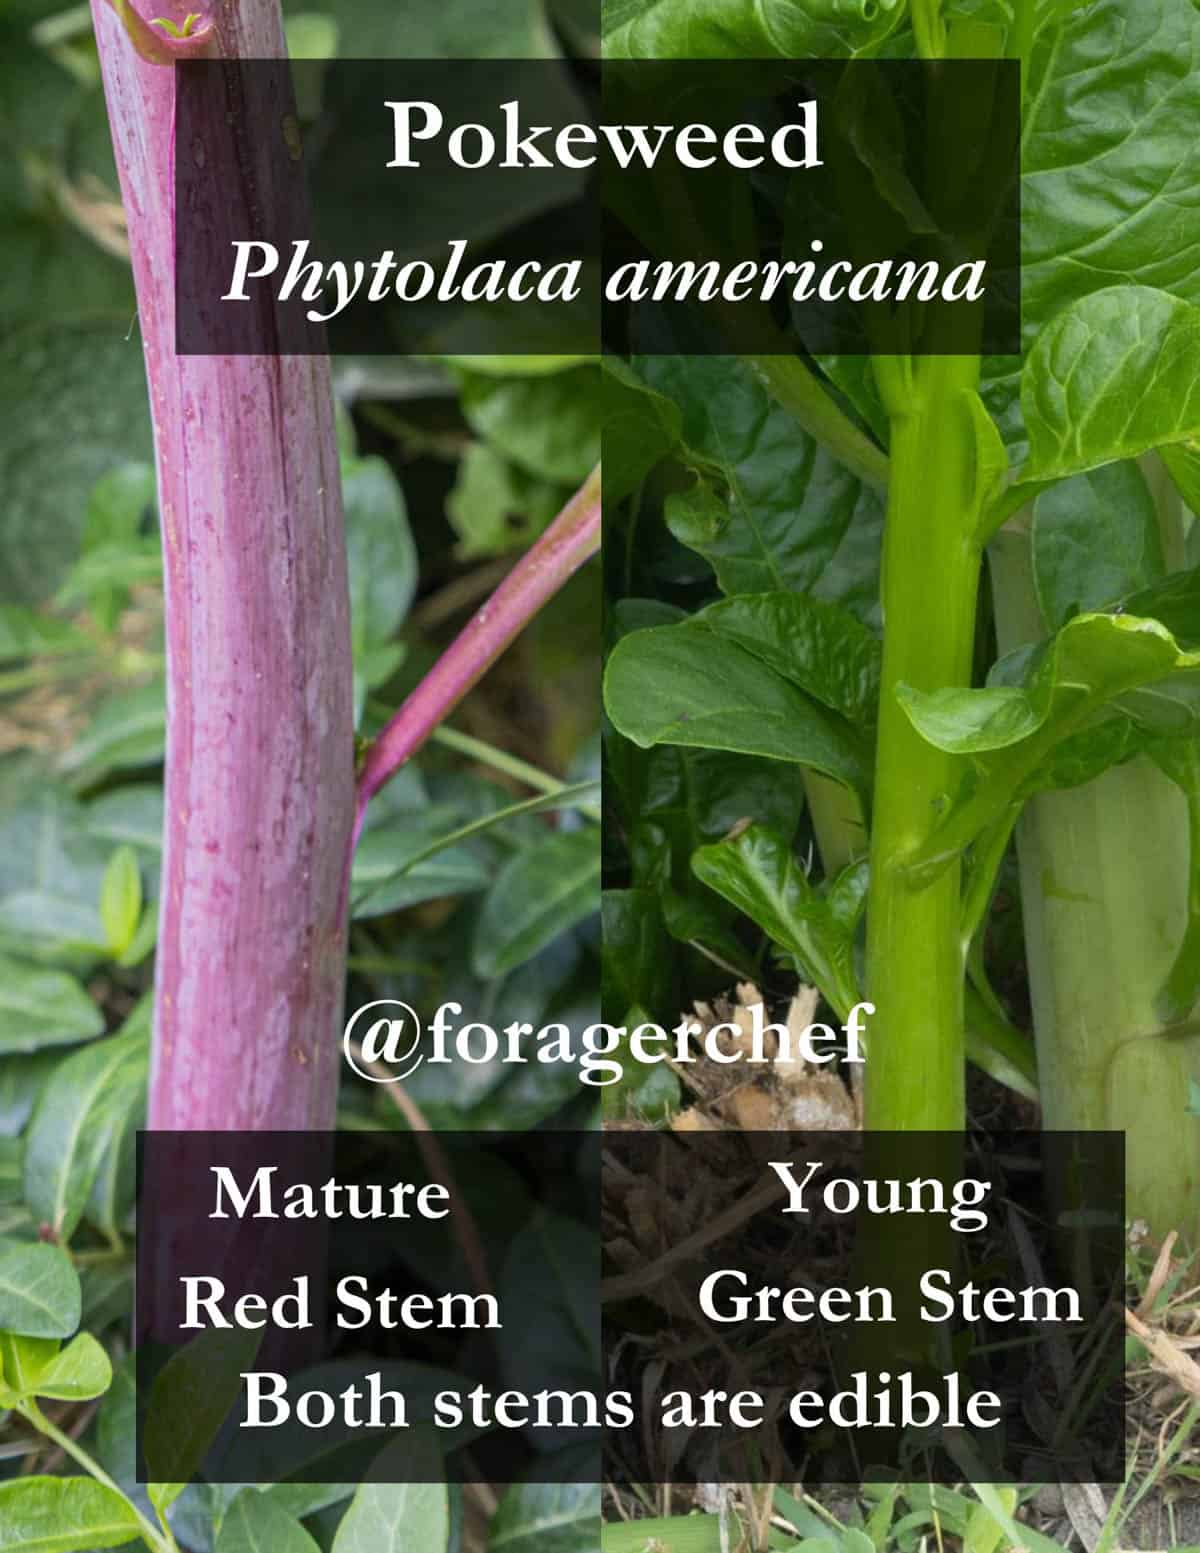 An infographic of two pokeweed shoots side by side showing red and green colored stems that are both edible. 